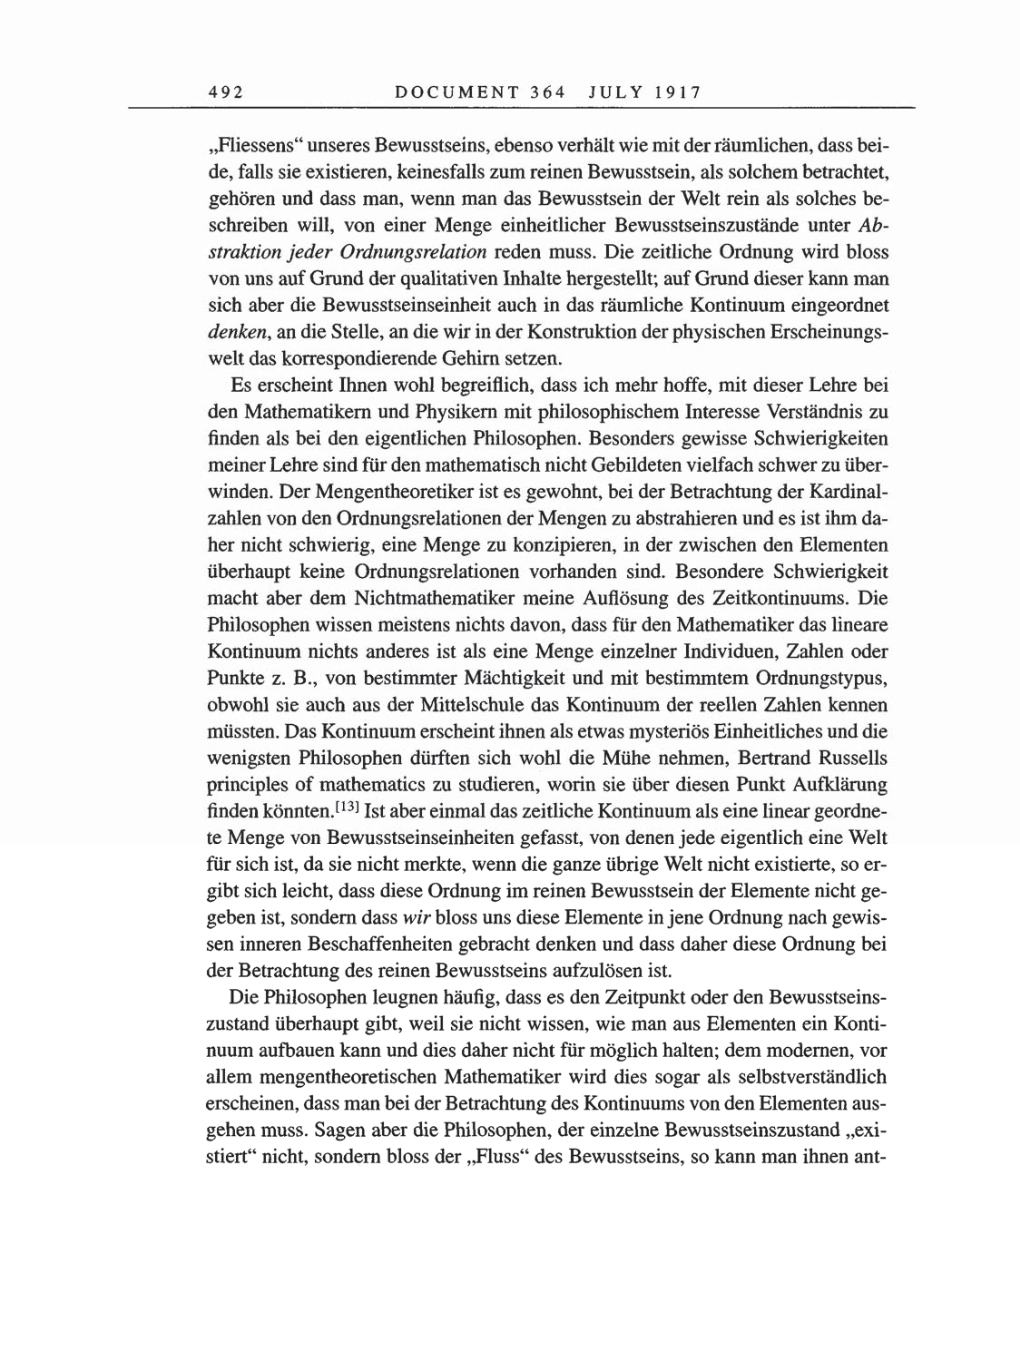 Volume 8, Part A: The Berlin Years: Correspondence 1914-1917 page 492